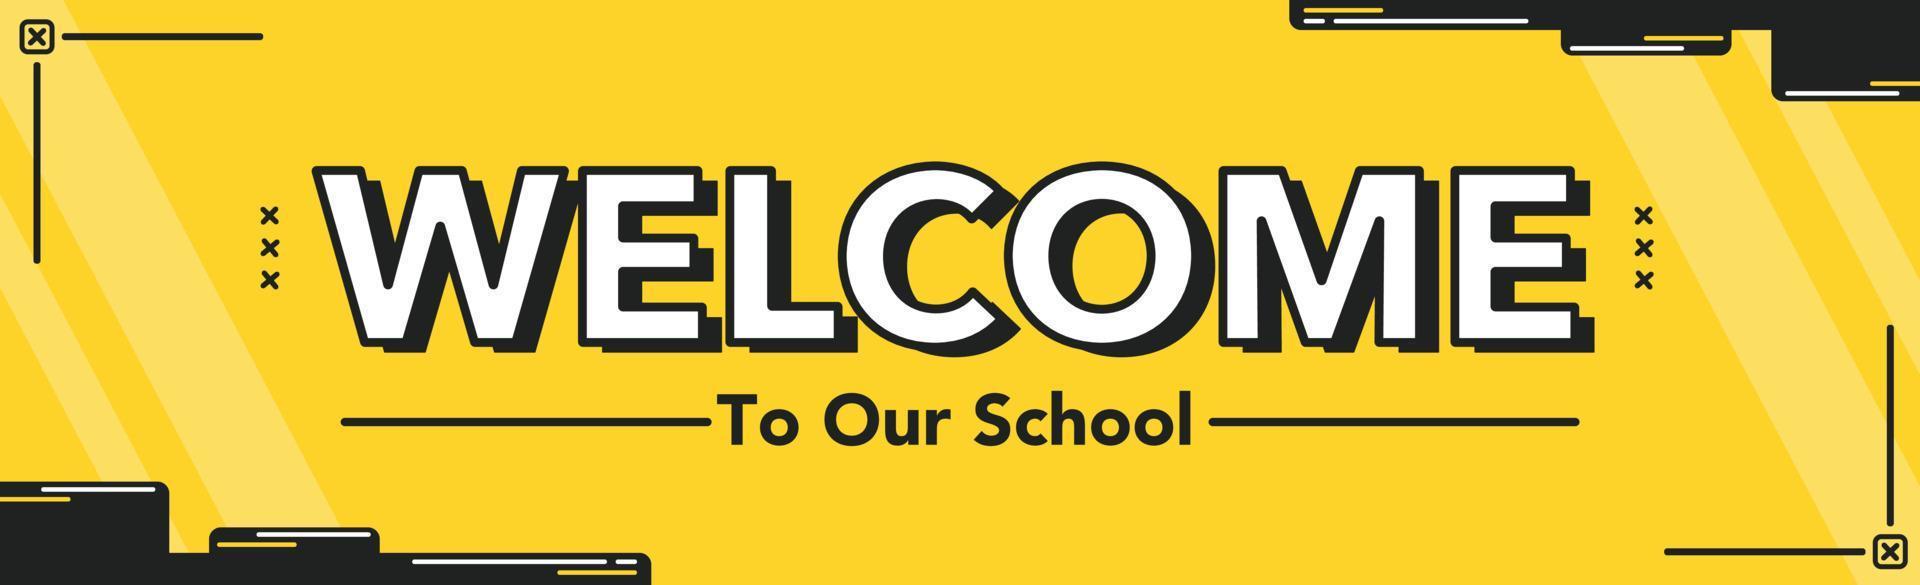 back to school welcome ink style banner template vector